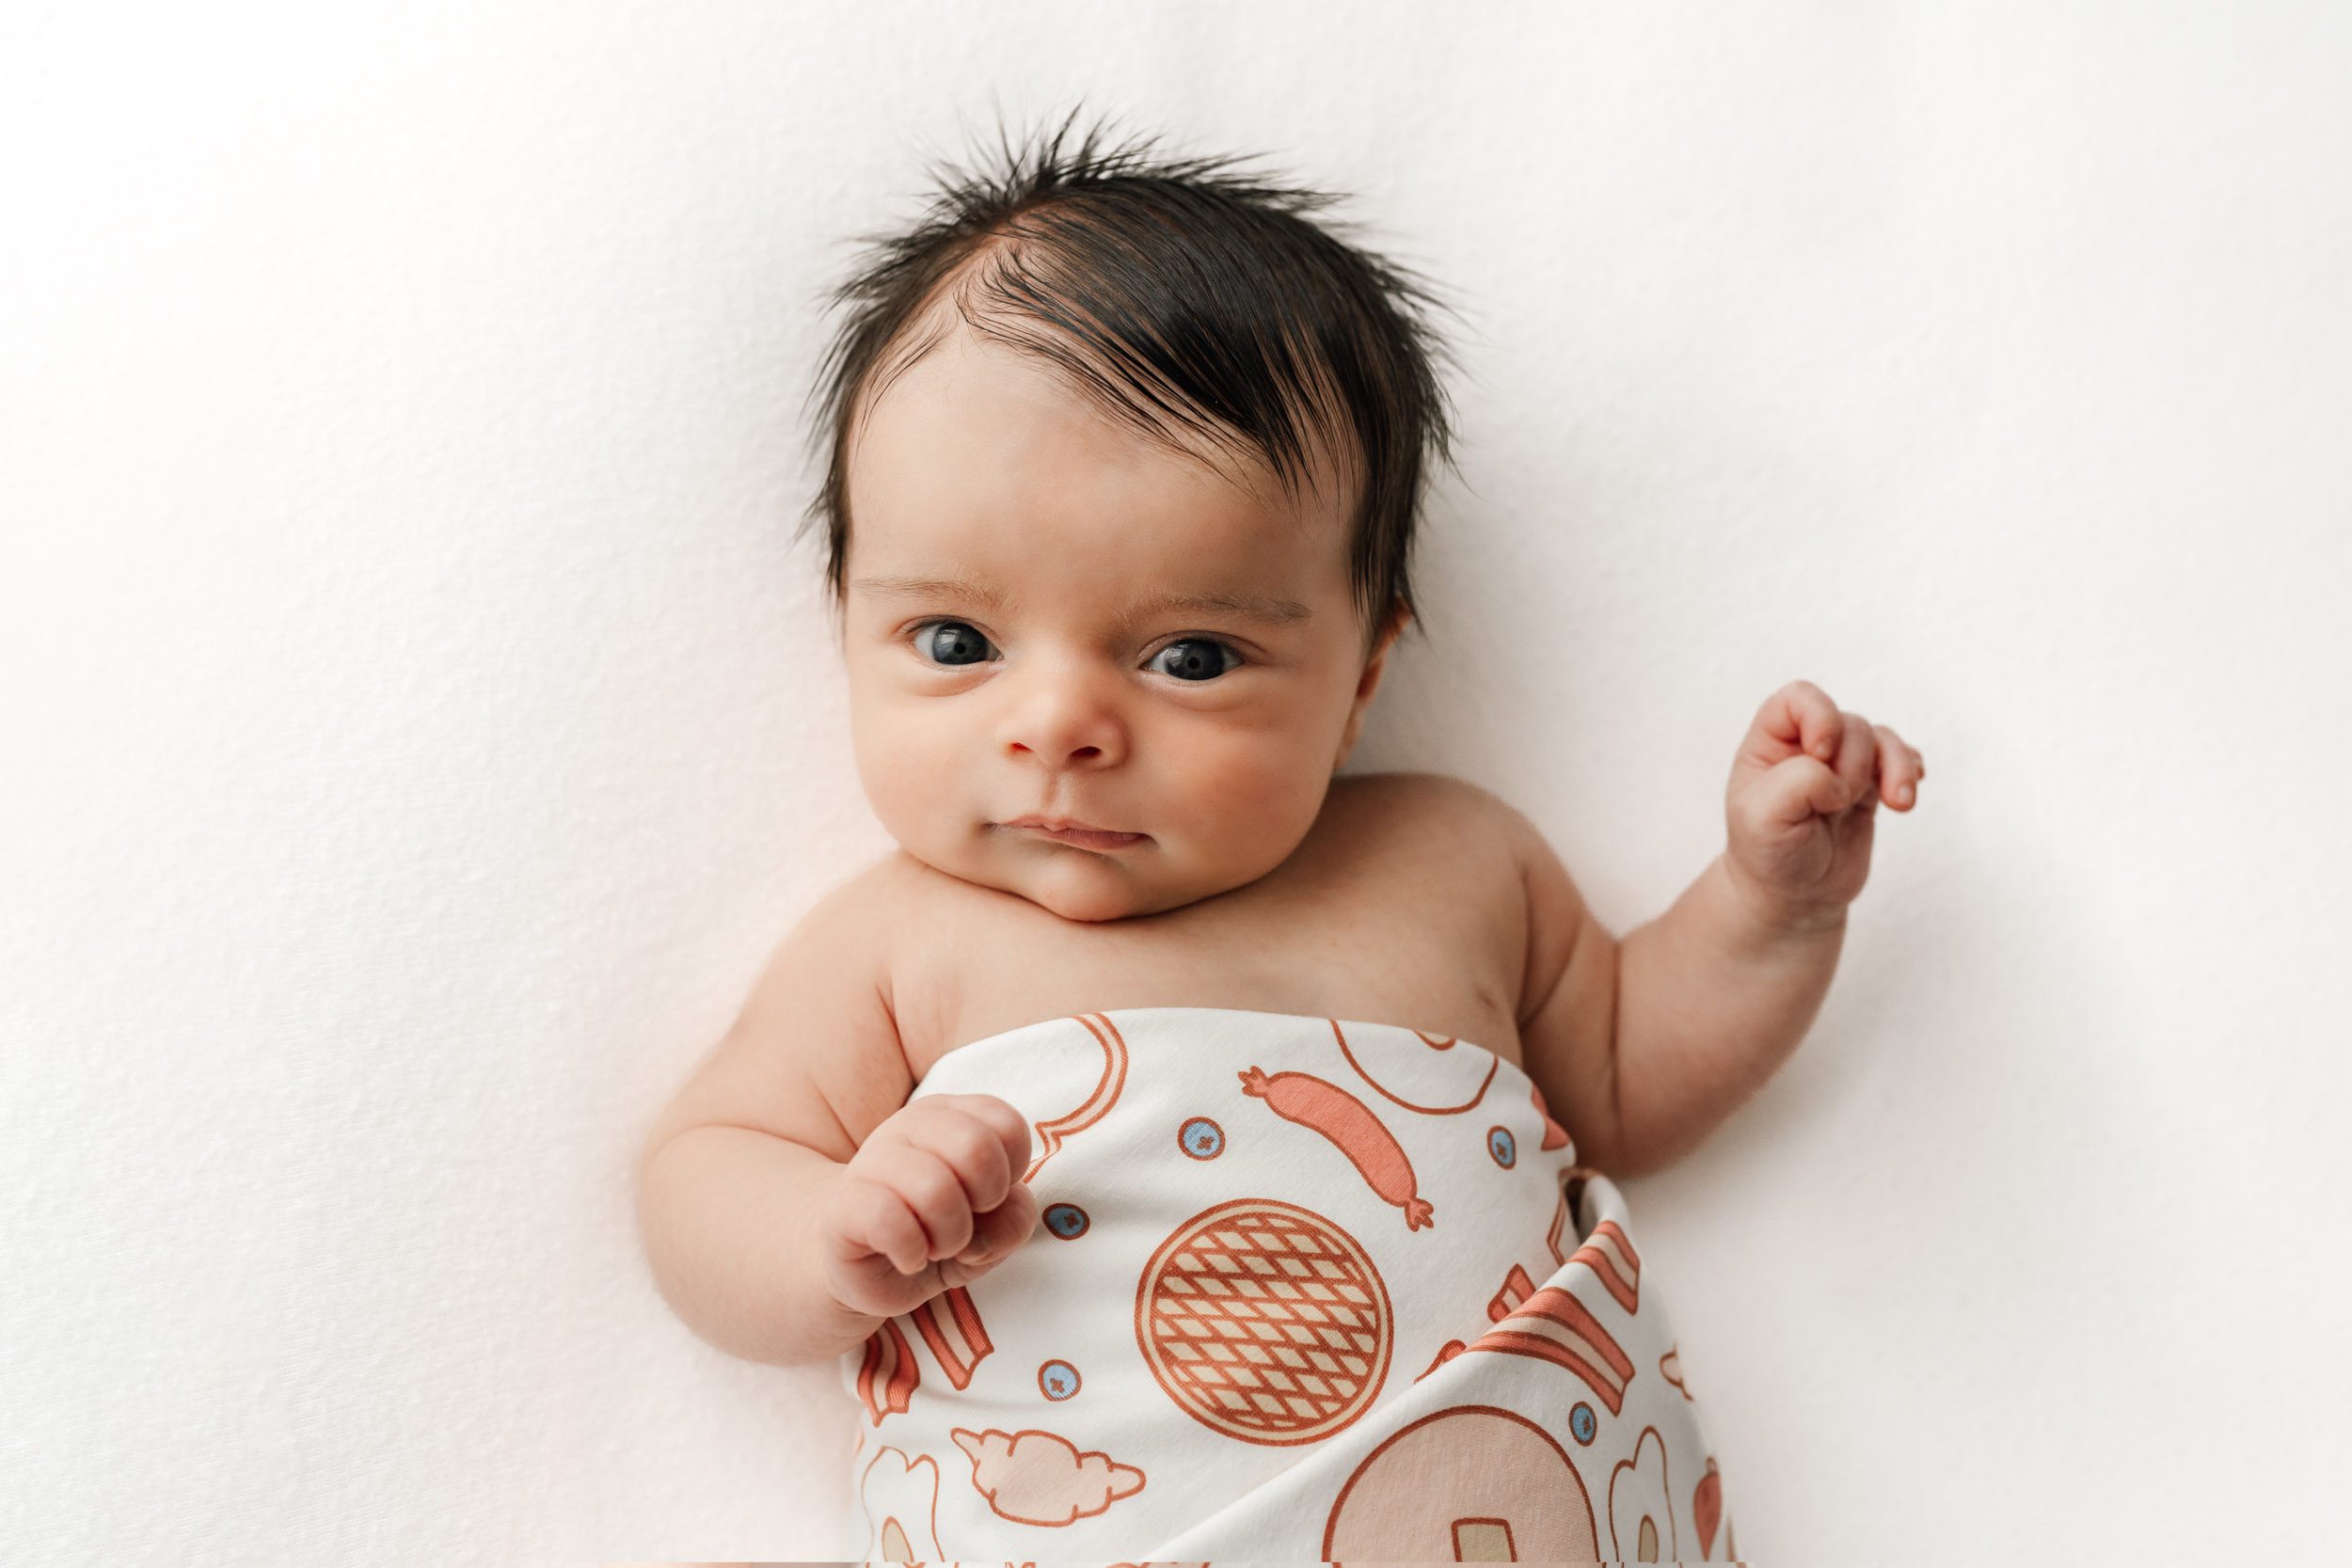 an older baby boy wrapped in a colorful swaddle laying on a white backdrop and looking directly up at the camera during a newborn photos session